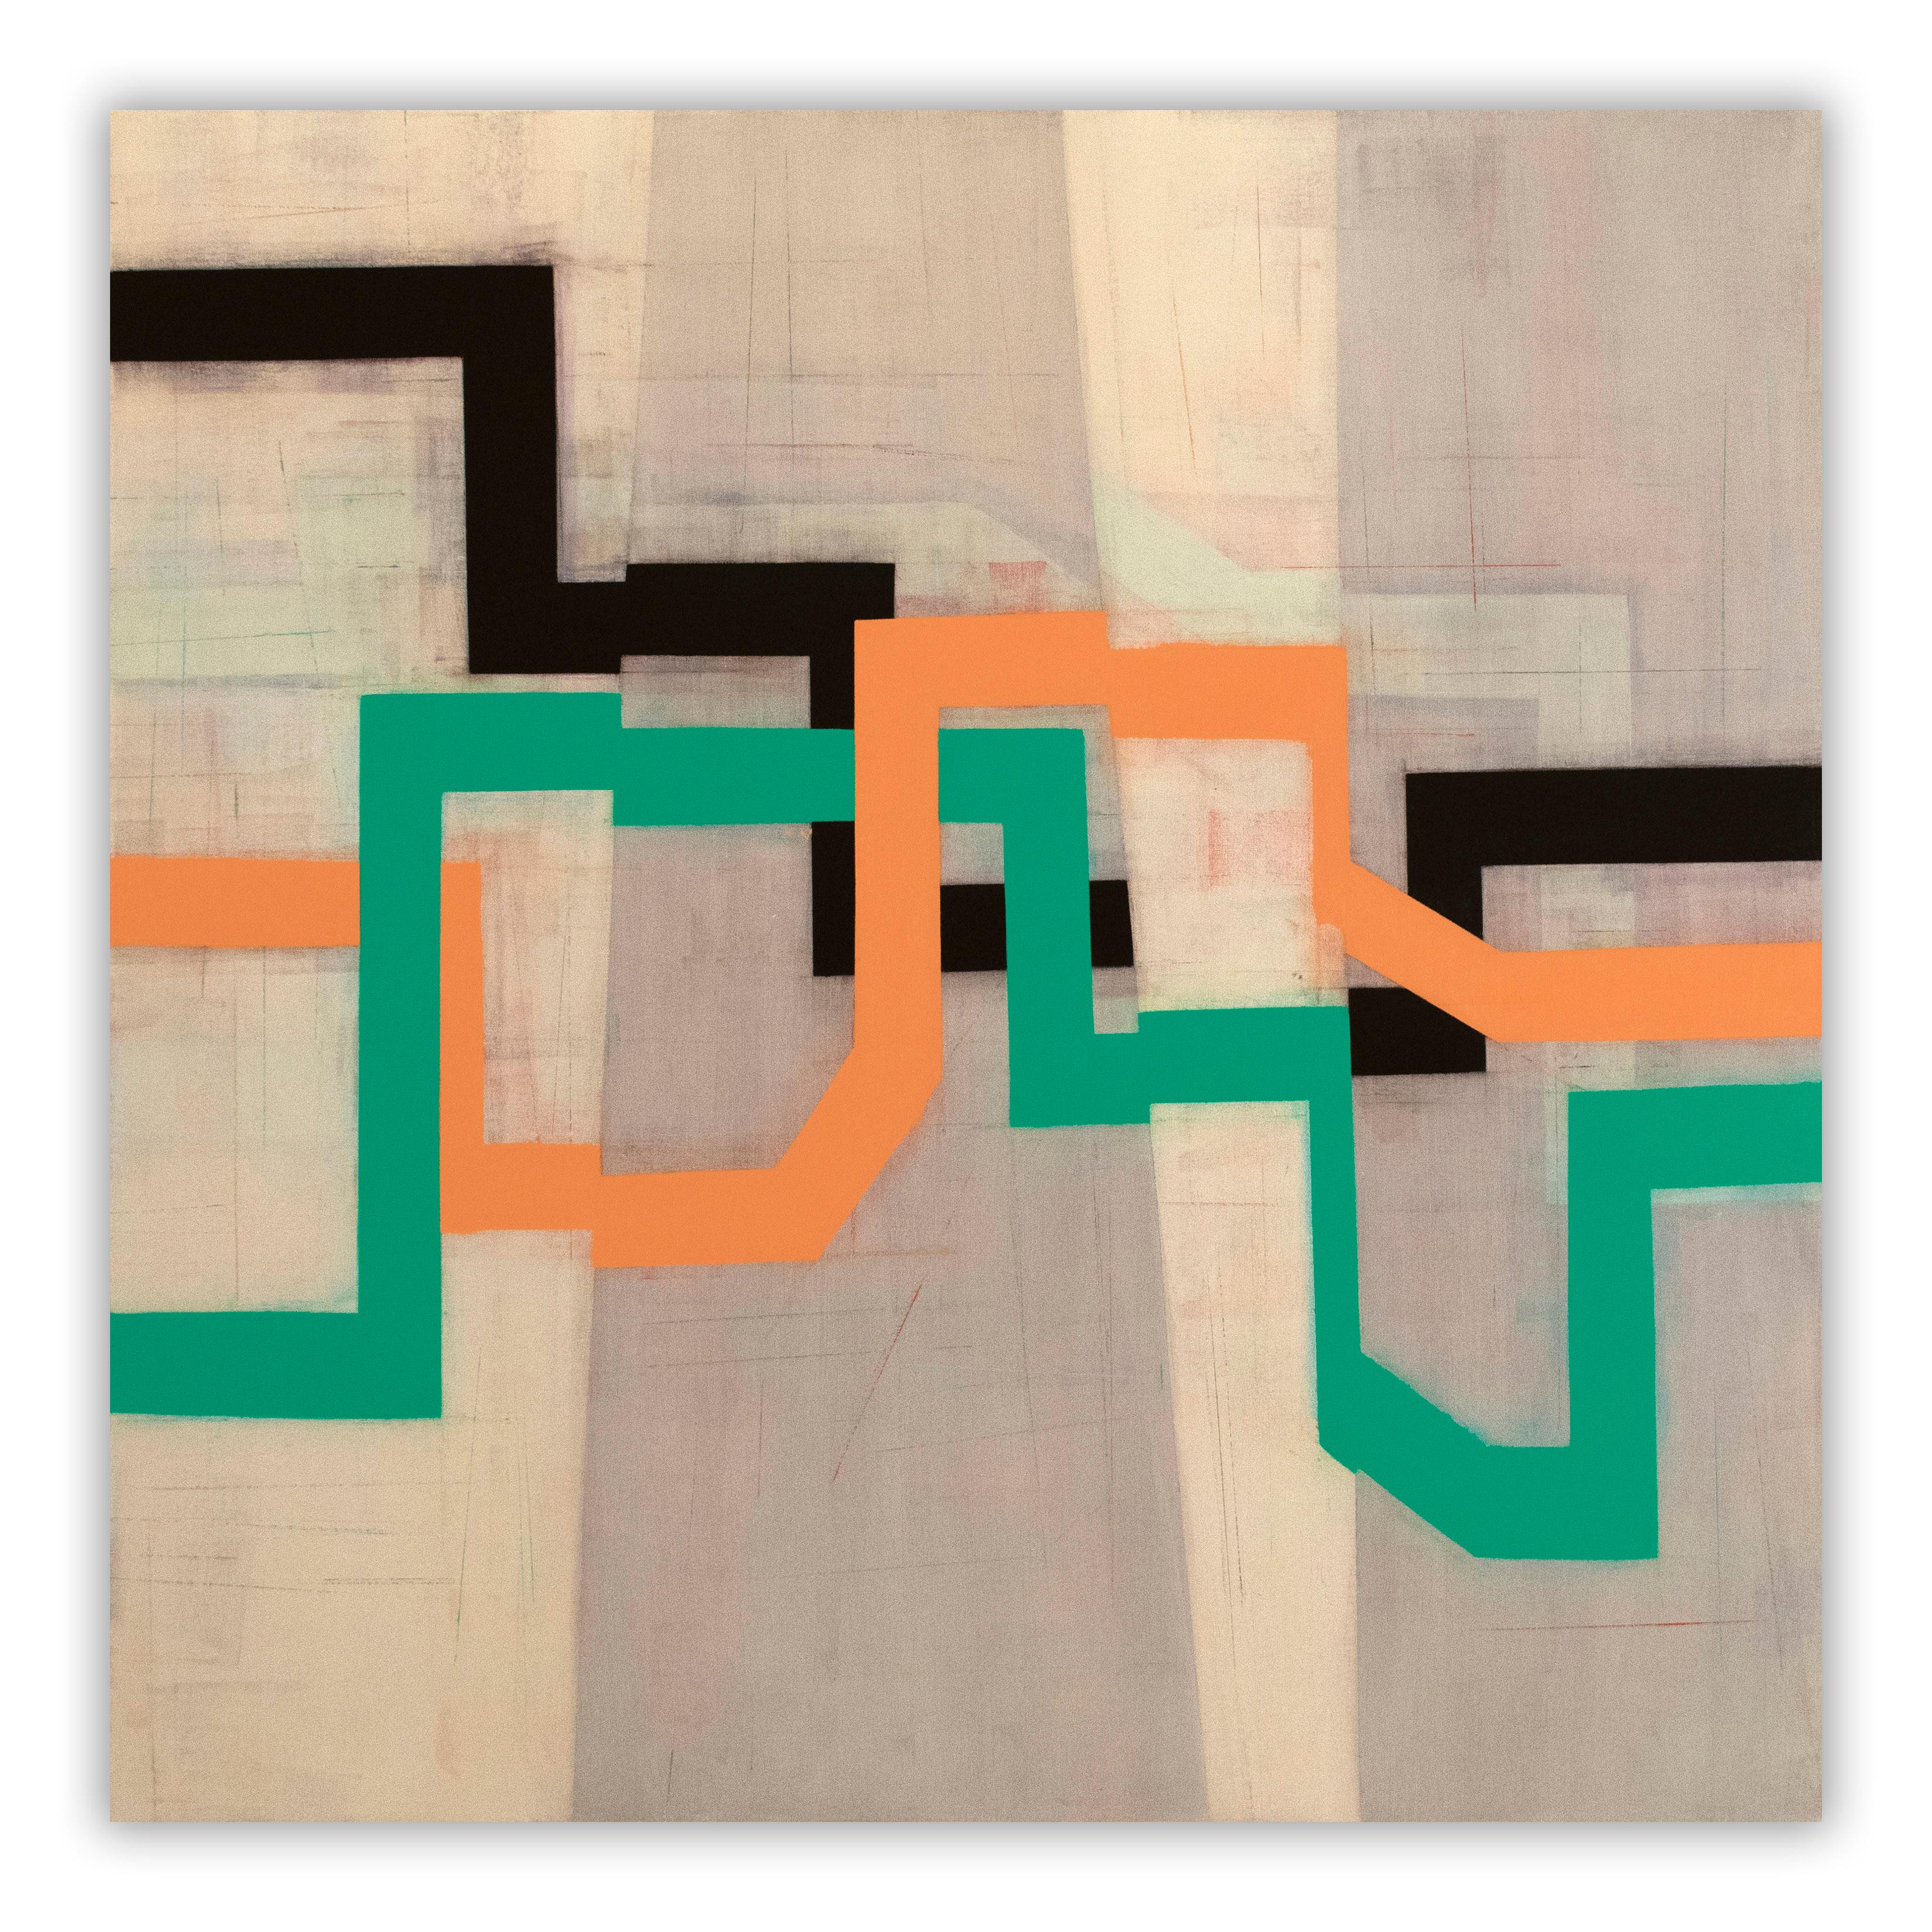 Never the Same Space Twice E8 (Abstract Painting)

Oil on canvas - Unframed

The philosophically conceptual abstract artist Steve Baris explores the spatial and temporal inconsistencies of our rapidly developing technological age. He lives and works